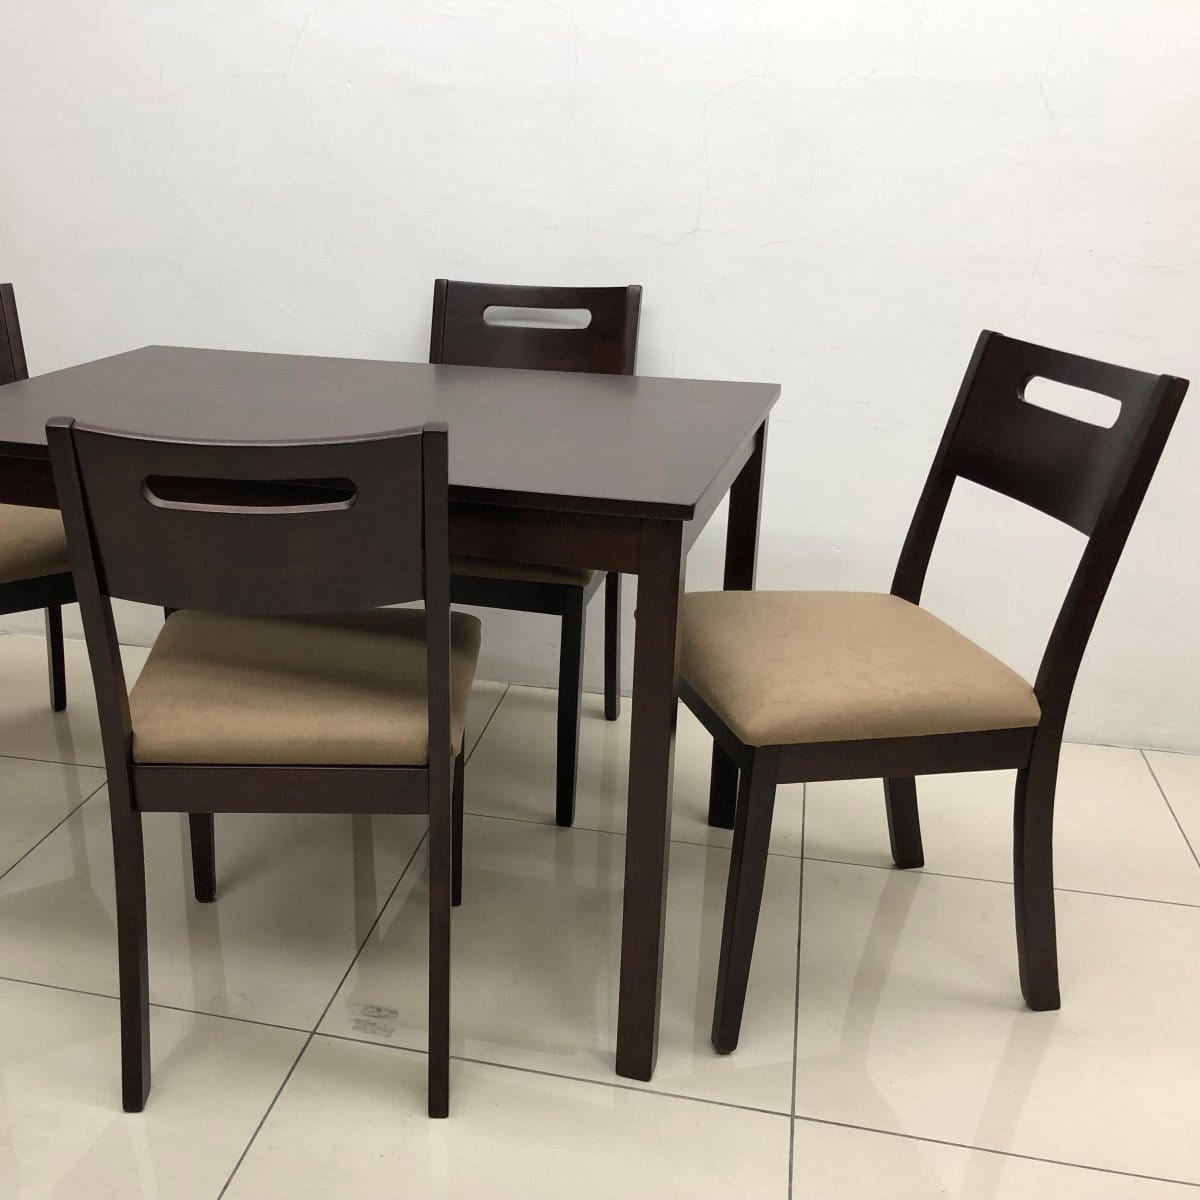 MORGAN 5pc 1.2m Solid Wood Dining Set (SYF-0149) picket and rail